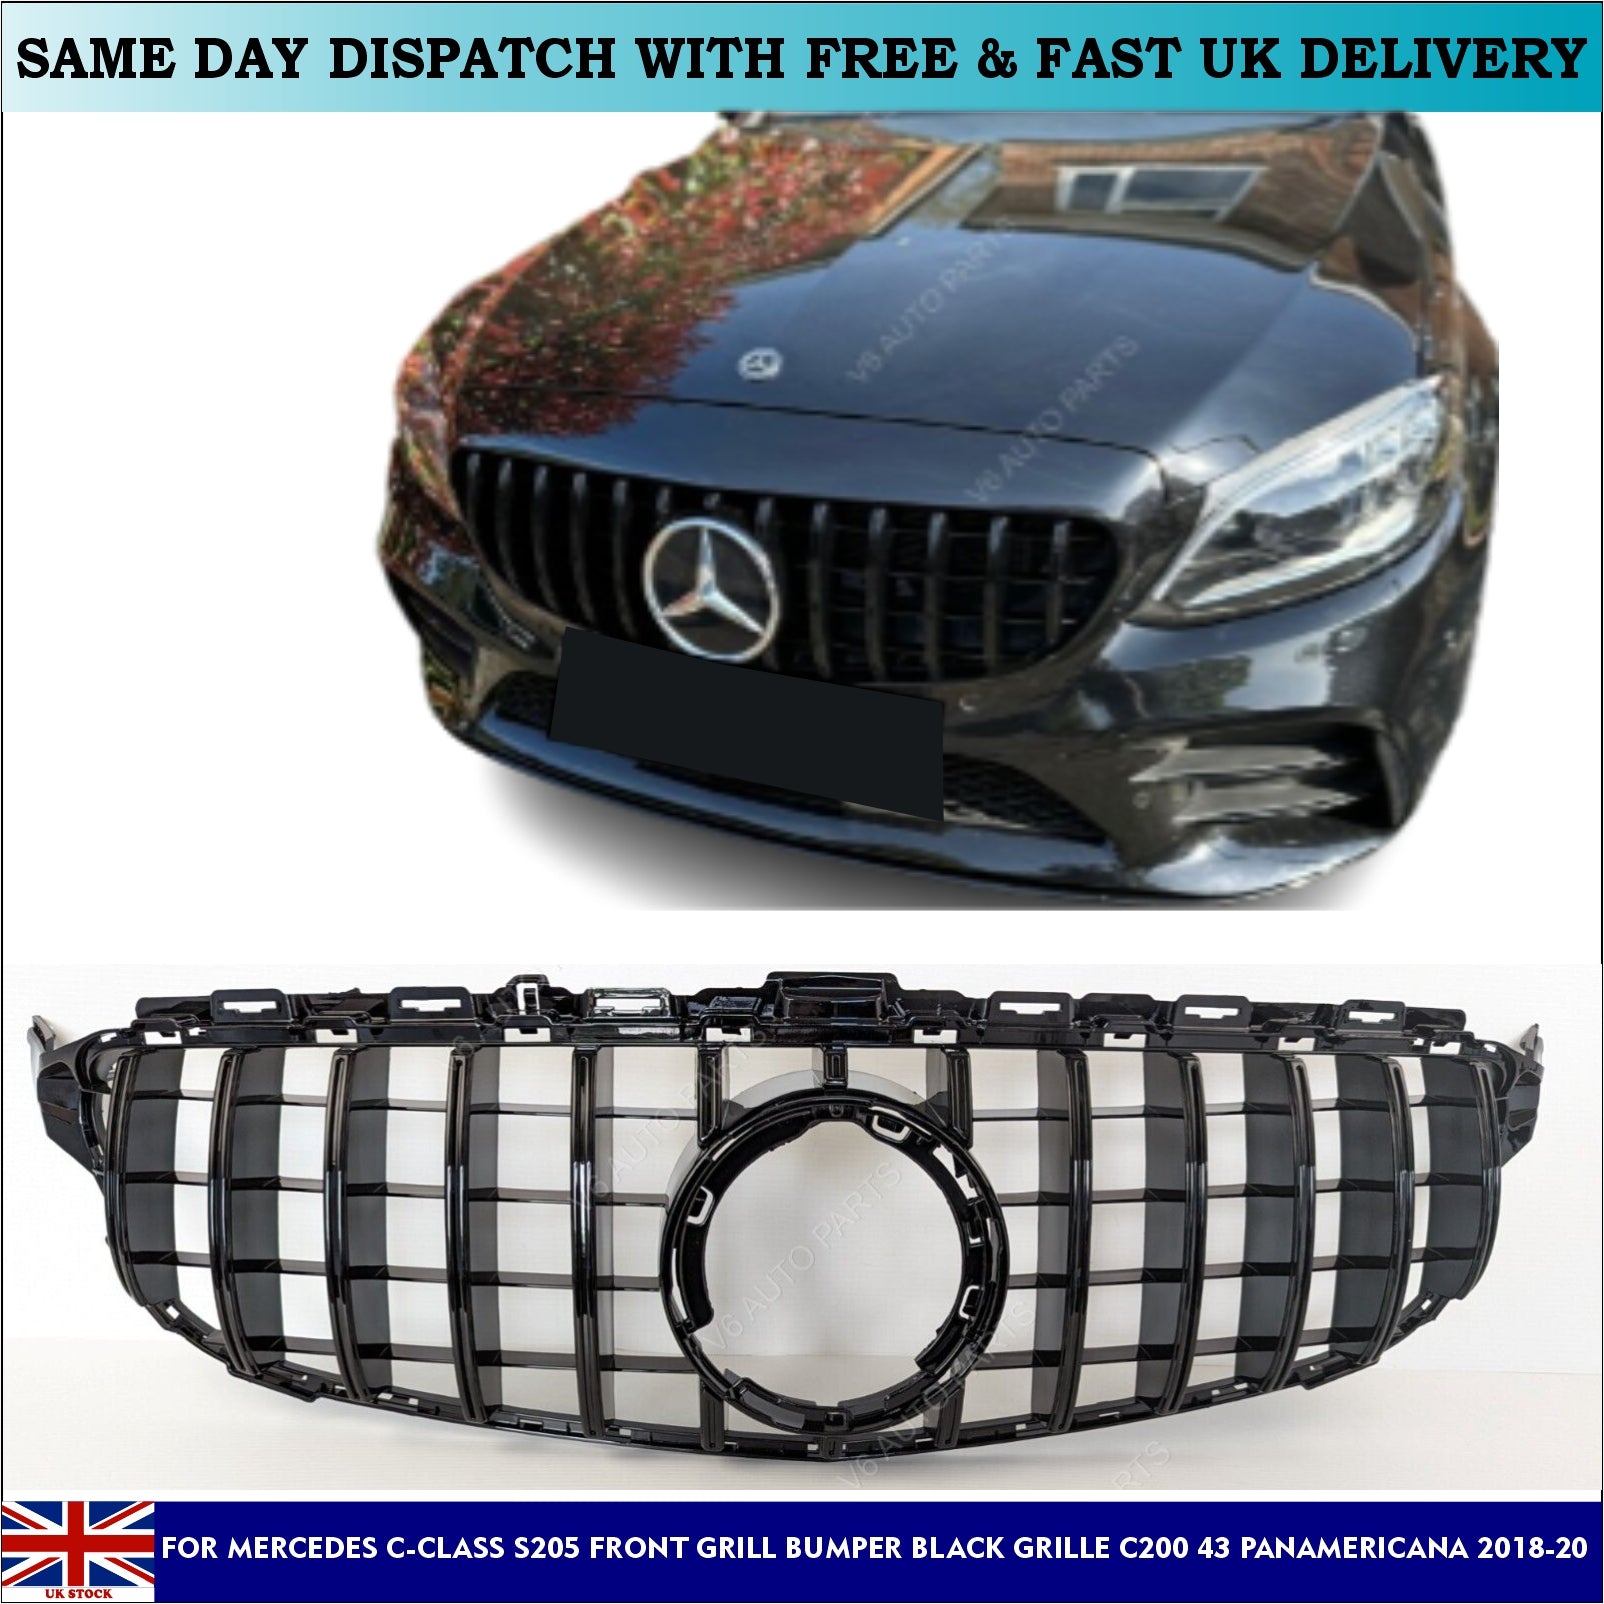 For Mercedes C-Class S205 Grill Front Bumper Grille C43 2018-20 AMG Panamericana